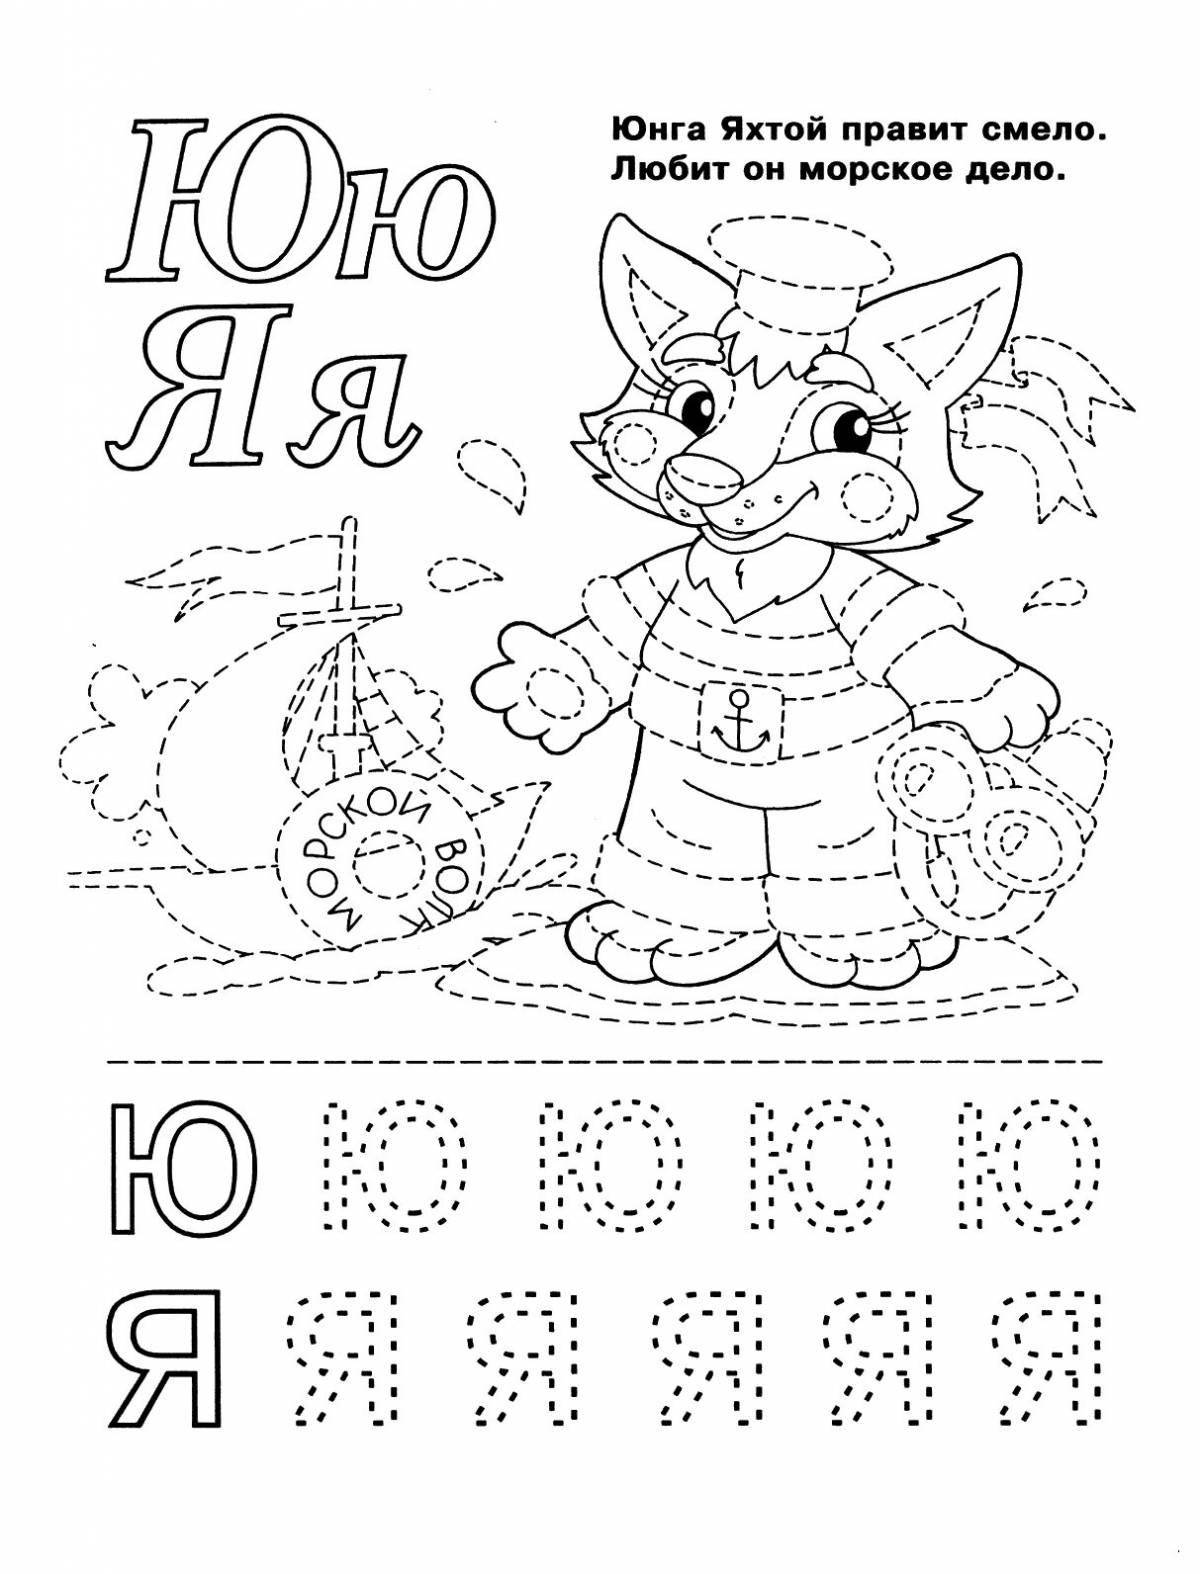 Colorful letter coloring page for kids